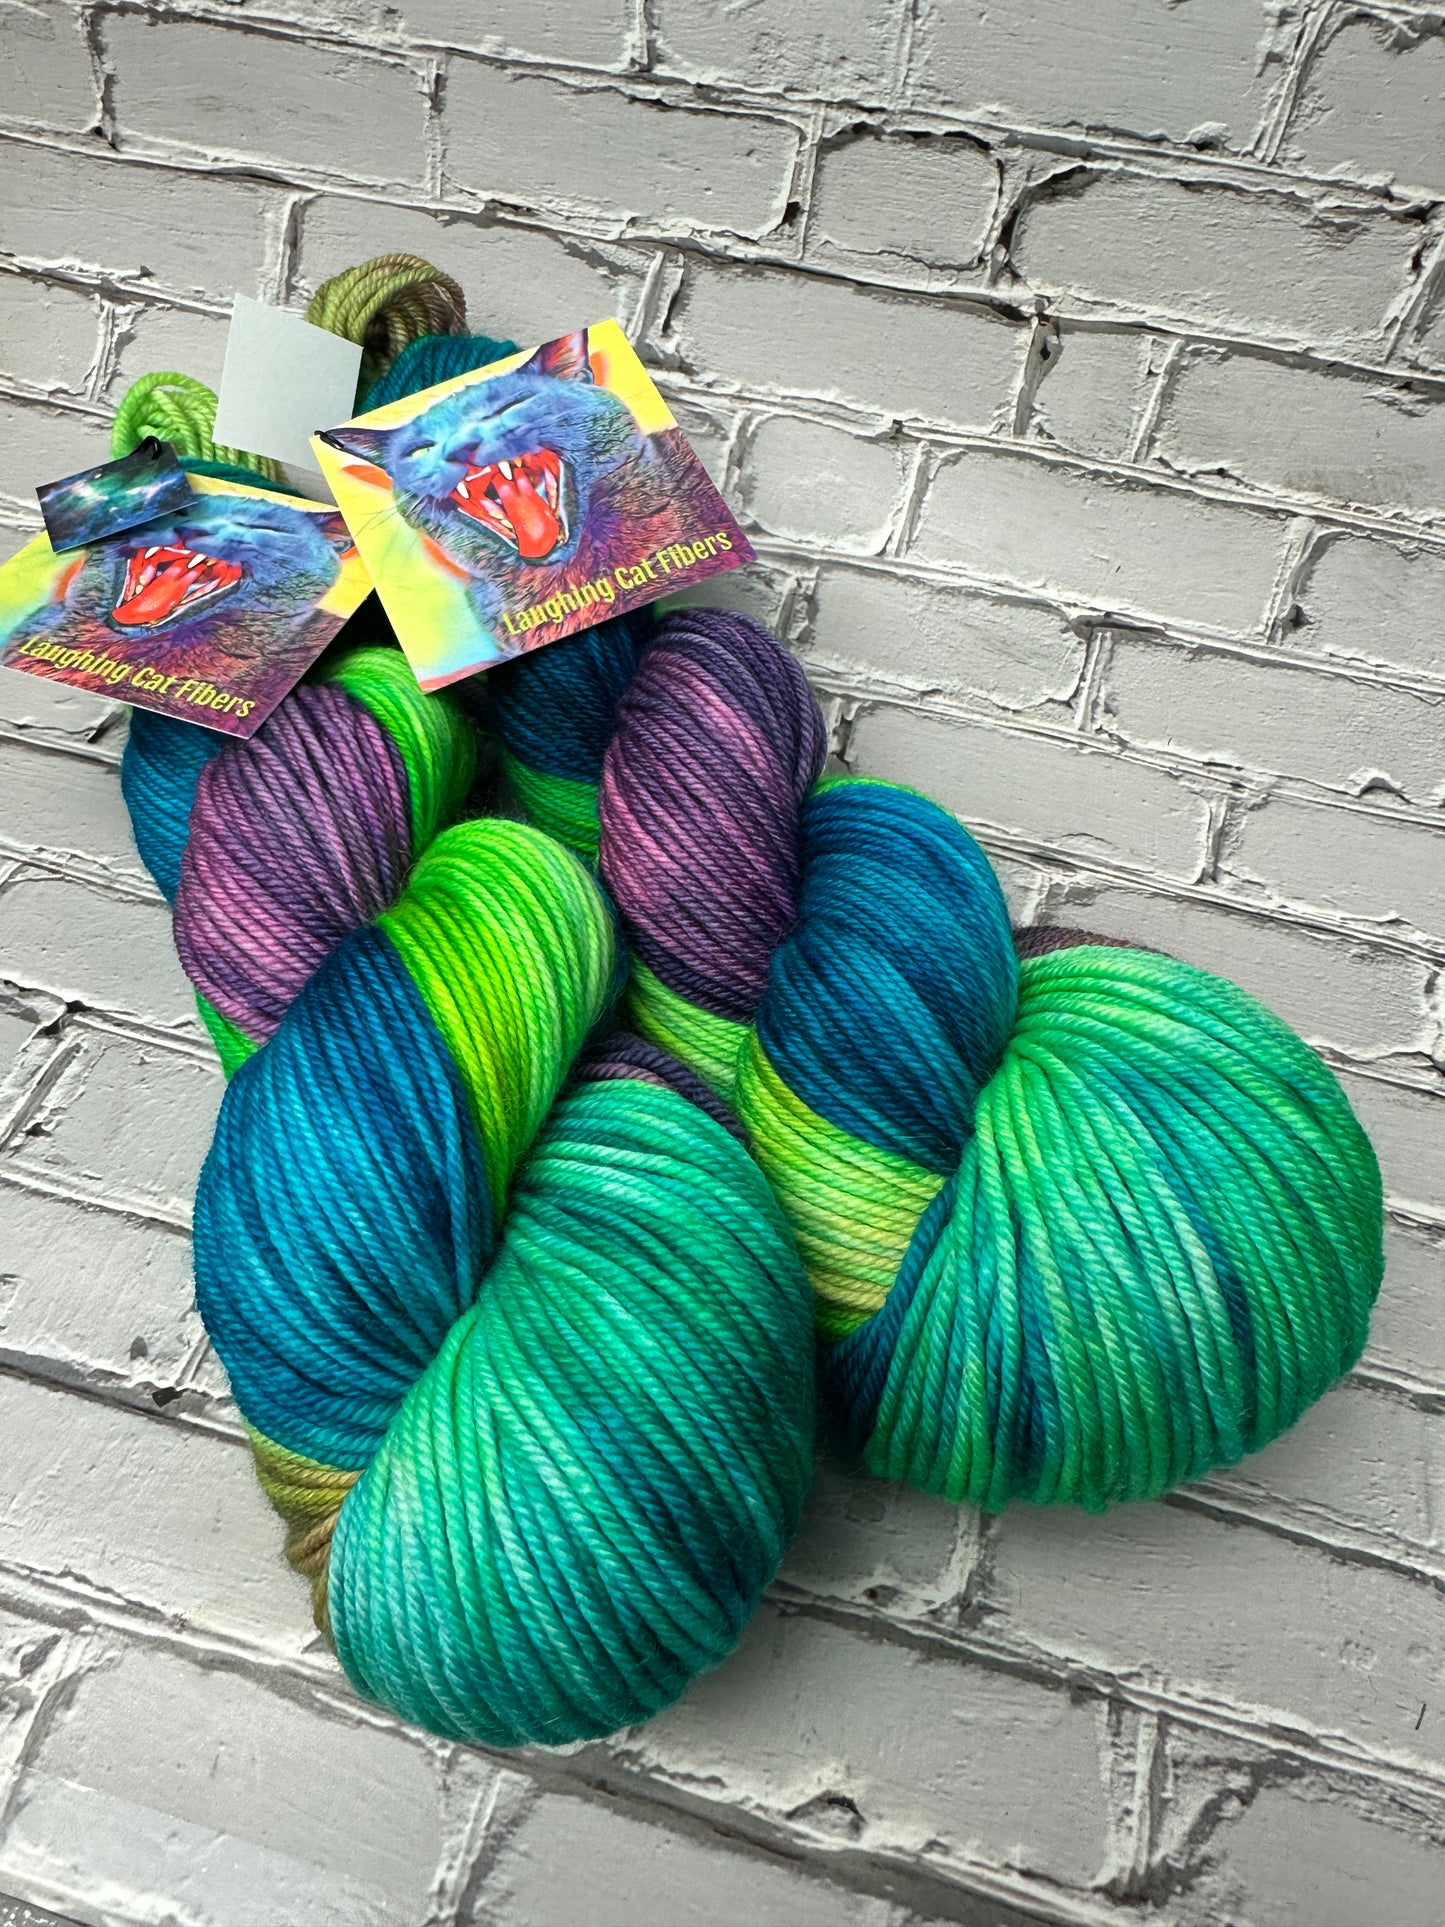 "Ethereal" on Various Yarn Bases